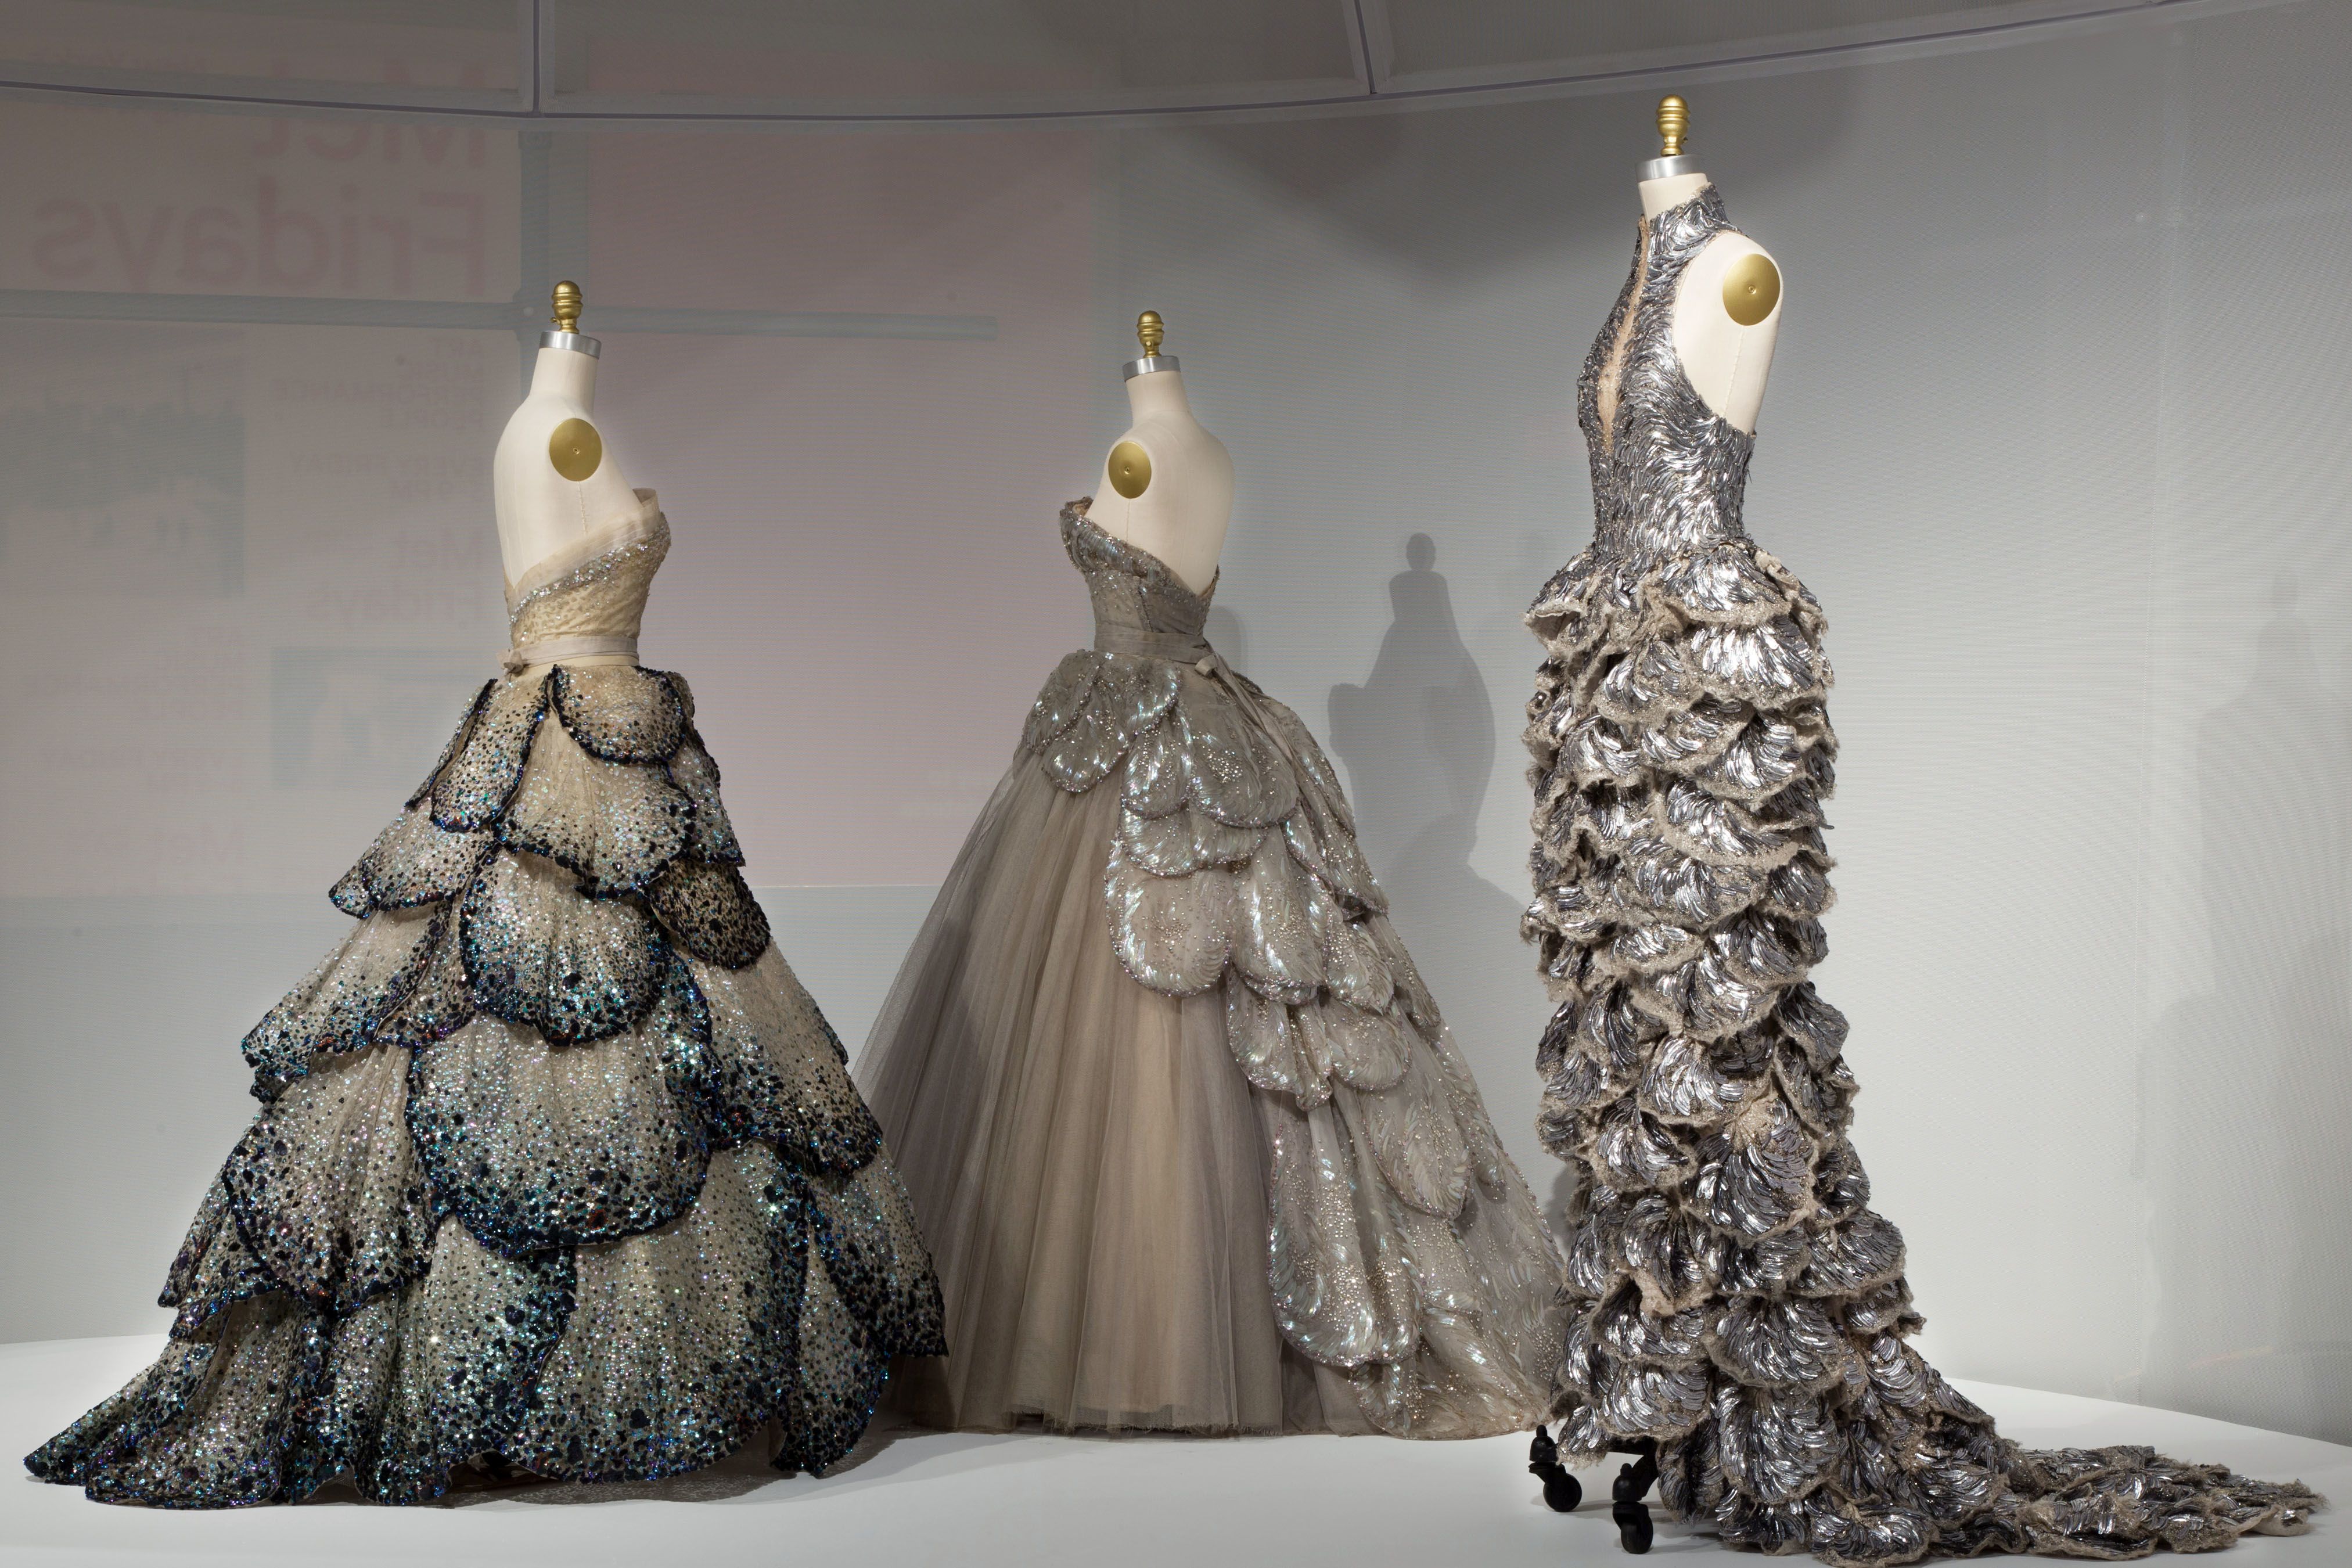 How Couture Can Shape A Body - The Making of the Molten Silver Dress 